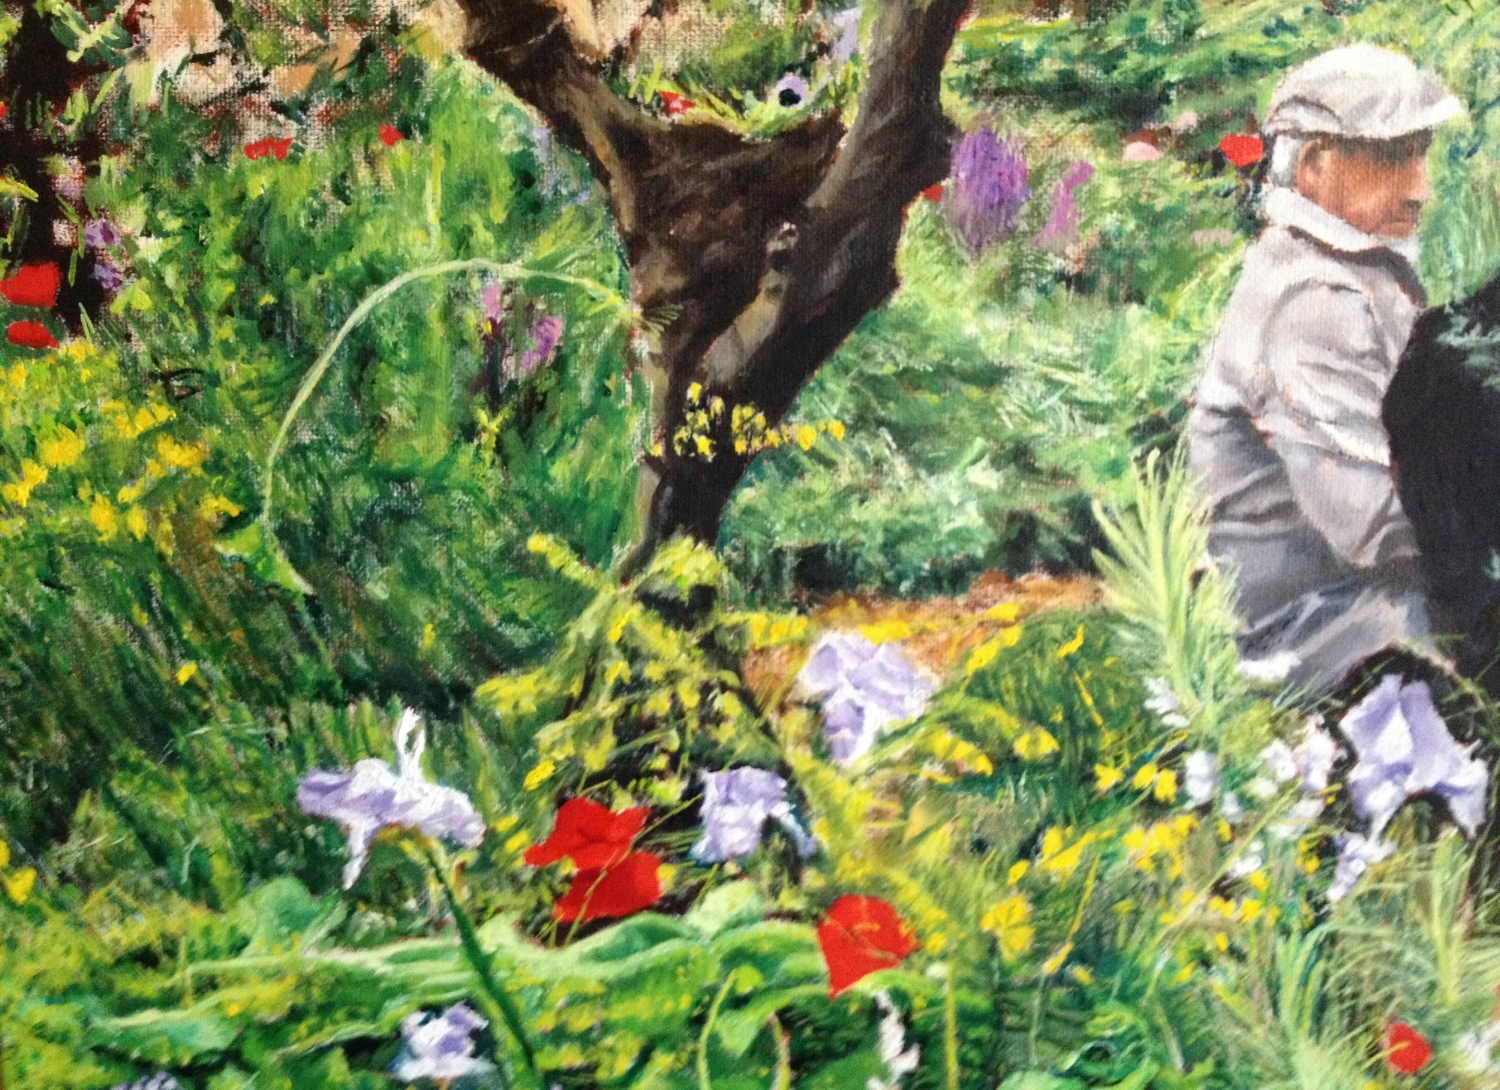 Detail of French Garden - background and foreground